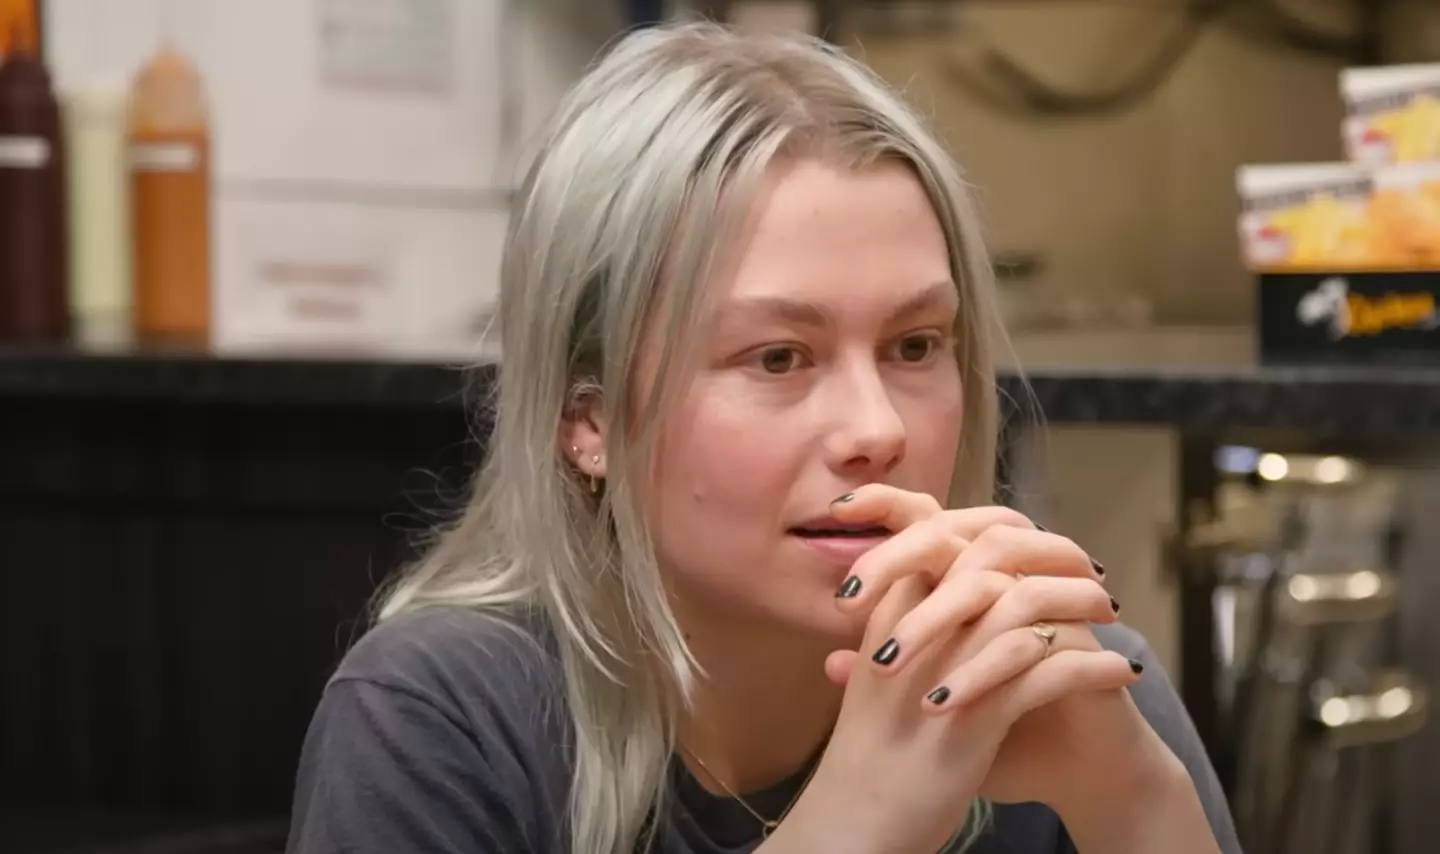 Phoebe Bridgers has said she no longer wants to 'kill her dad' following her song 'Kyoto'.